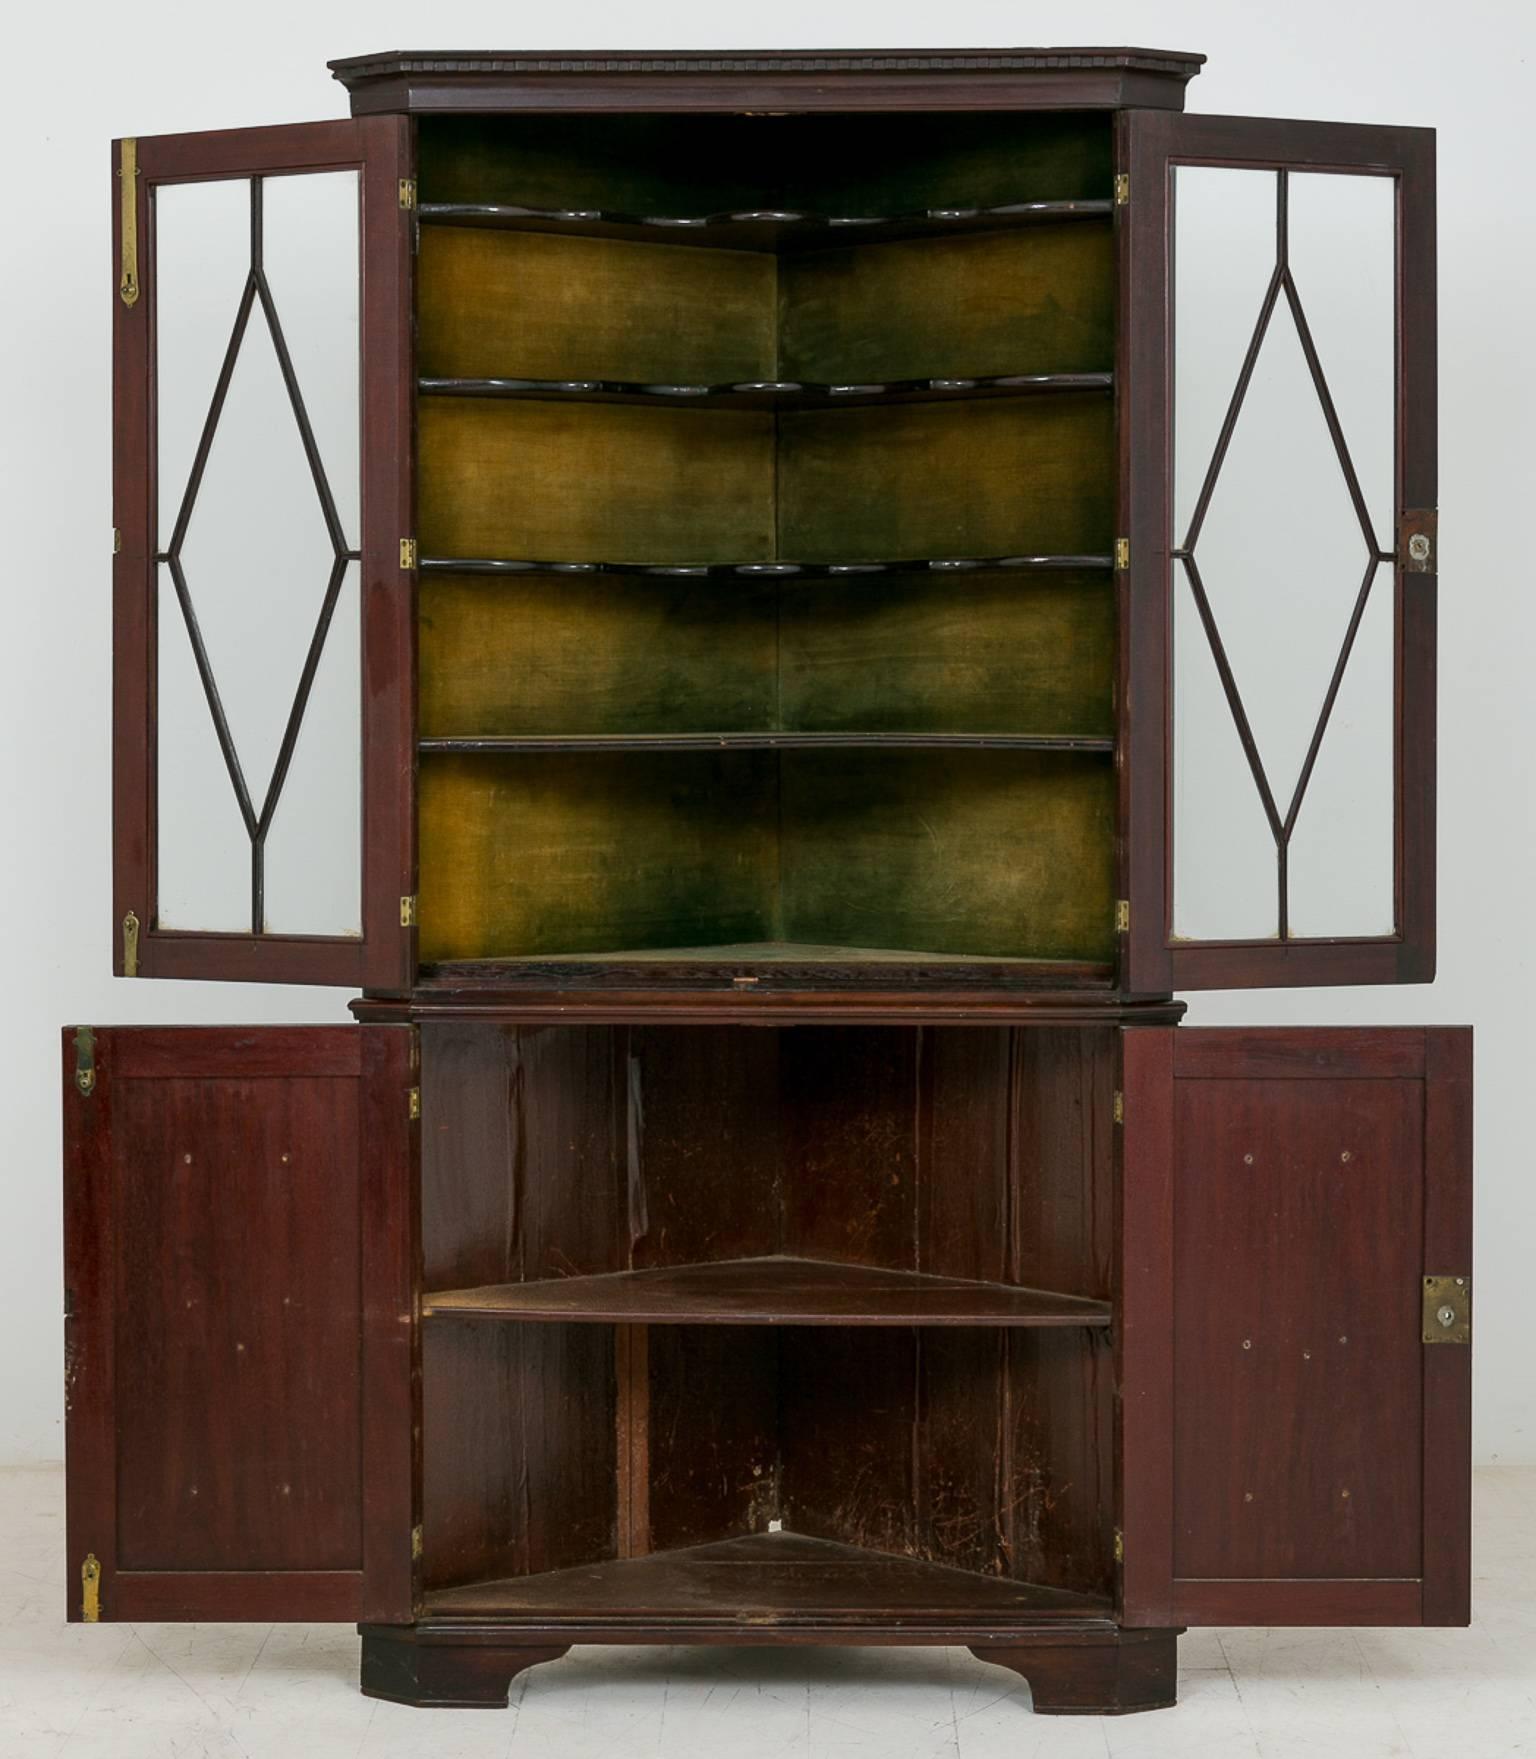 George II mahogany glazed corner cabinet.
Standing on bracket feet, featuring two fielded panel doors on the bottom section, the top section having a pair of astragal glazed doors revealing wonderful shaped shelves (typically early